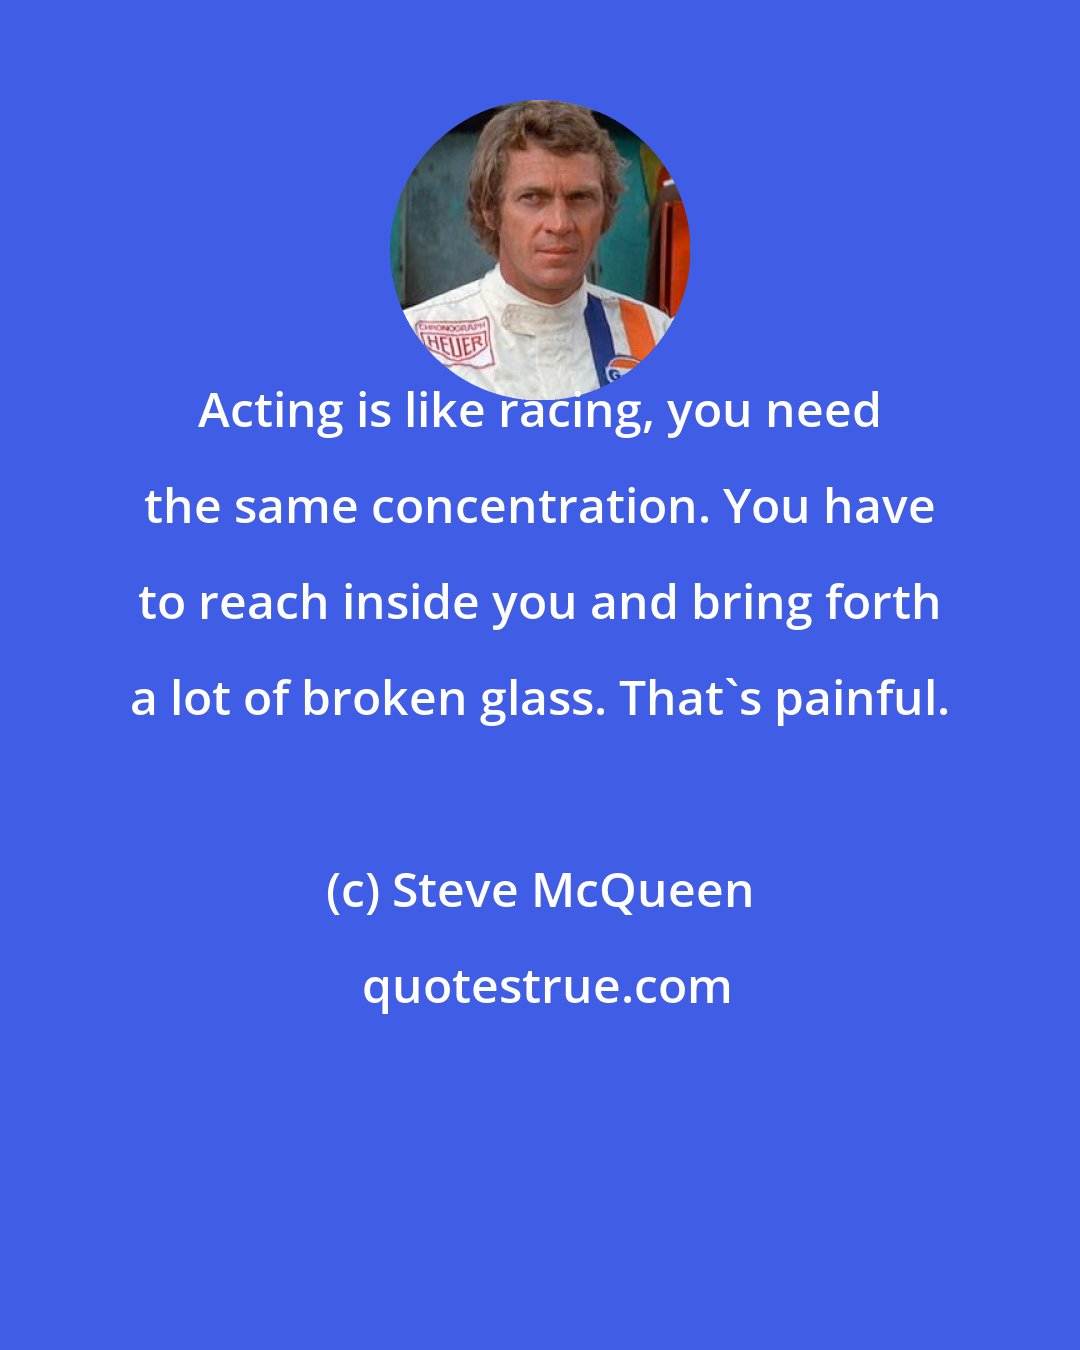 Steve McQueen: Acting is like racing, you need the same concentration. You have to reach inside you and bring forth a lot of broken glass. That's painful.